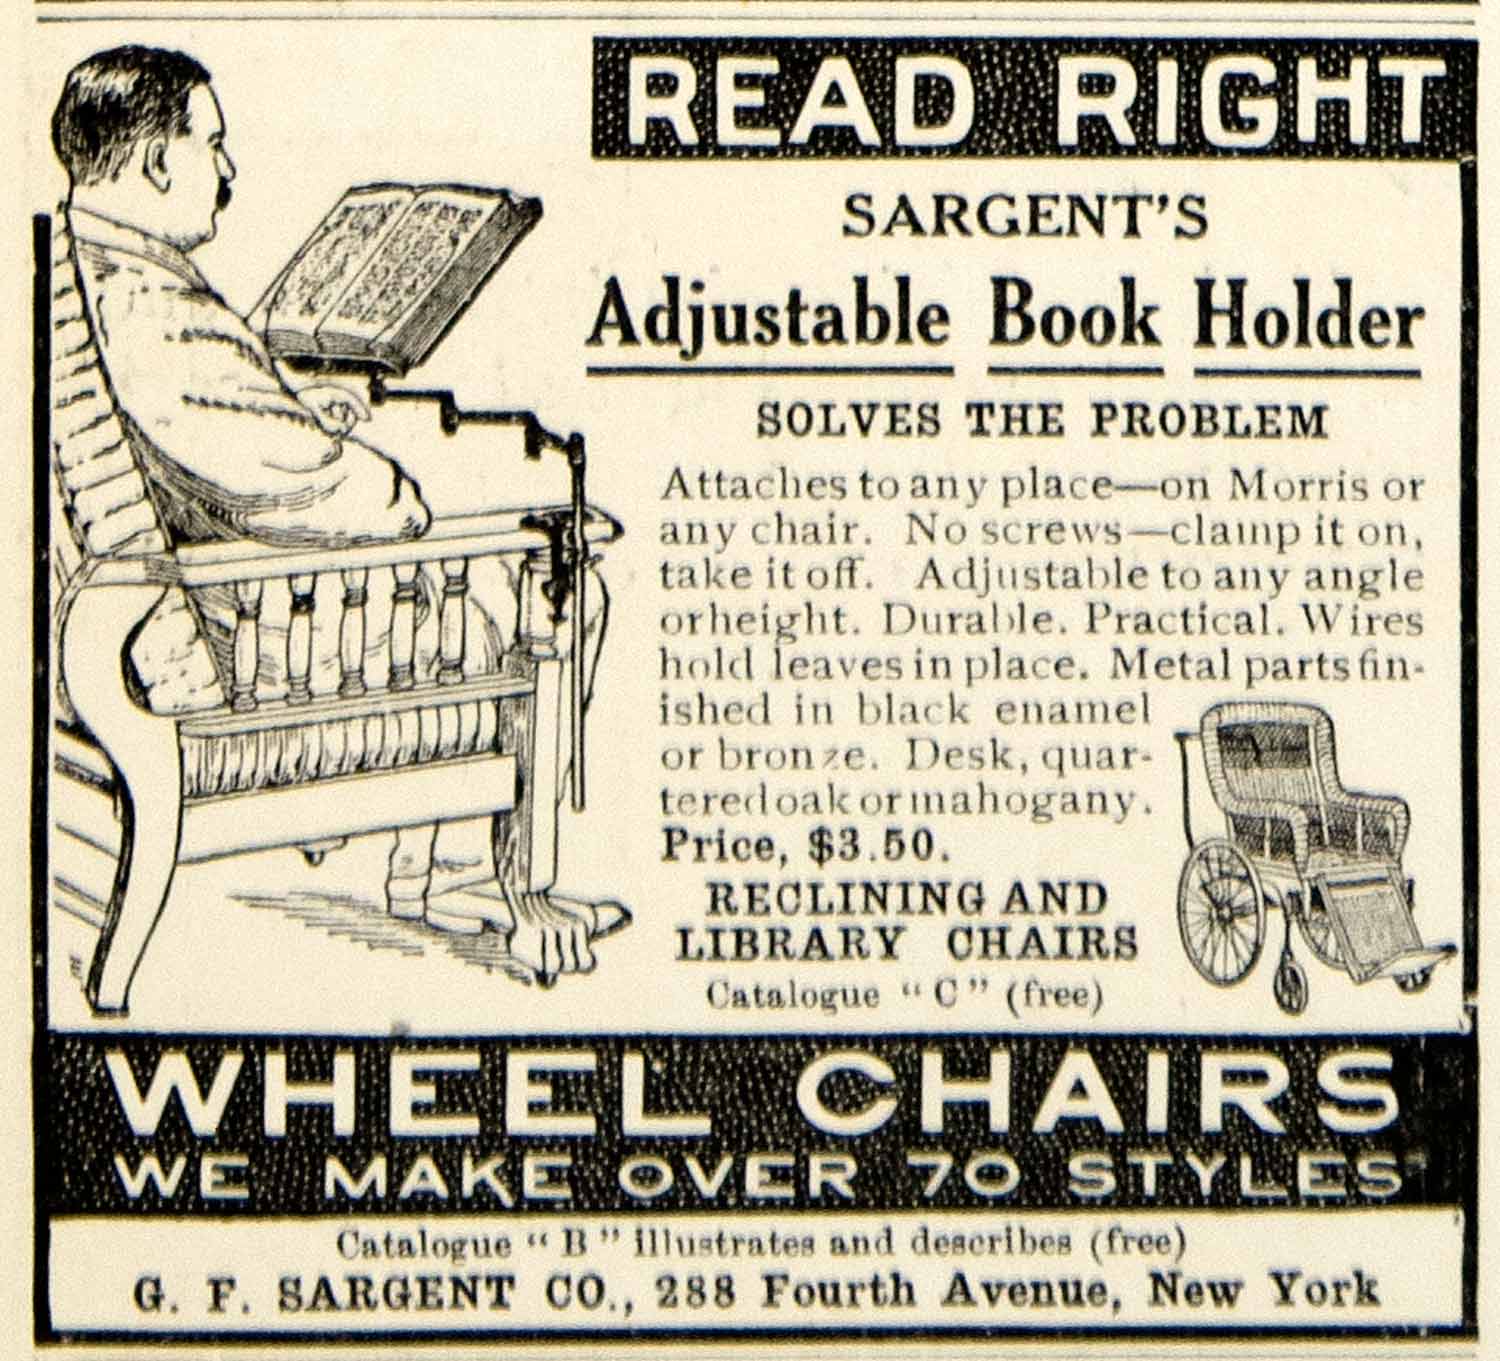 1905 Ad GF Sargent 288 Fourth Ave New York Wheel Chair Adjustable Book YDL2